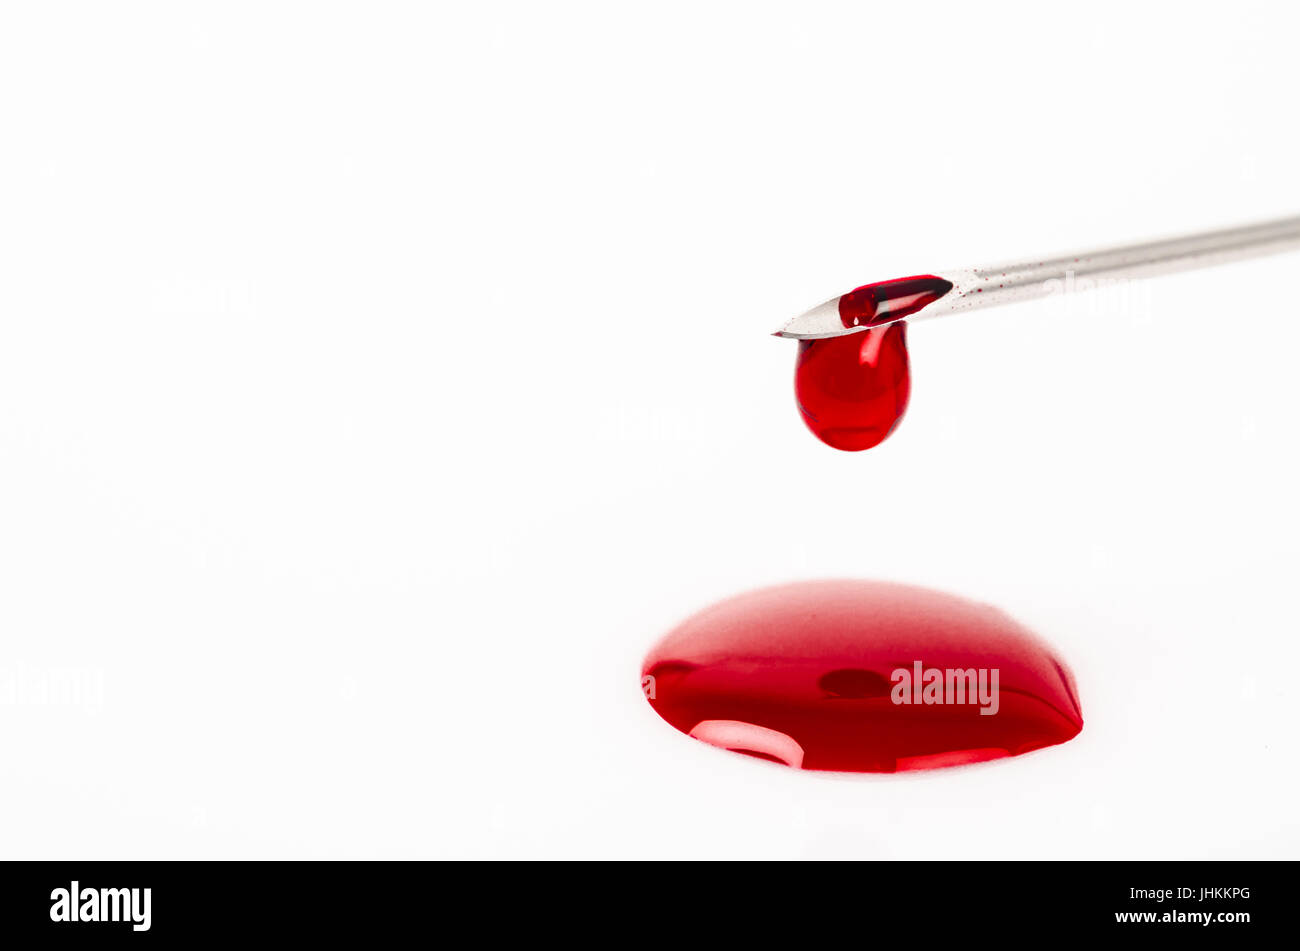 Macro view of drop of blood from needle syringe over white background. Stock Photo